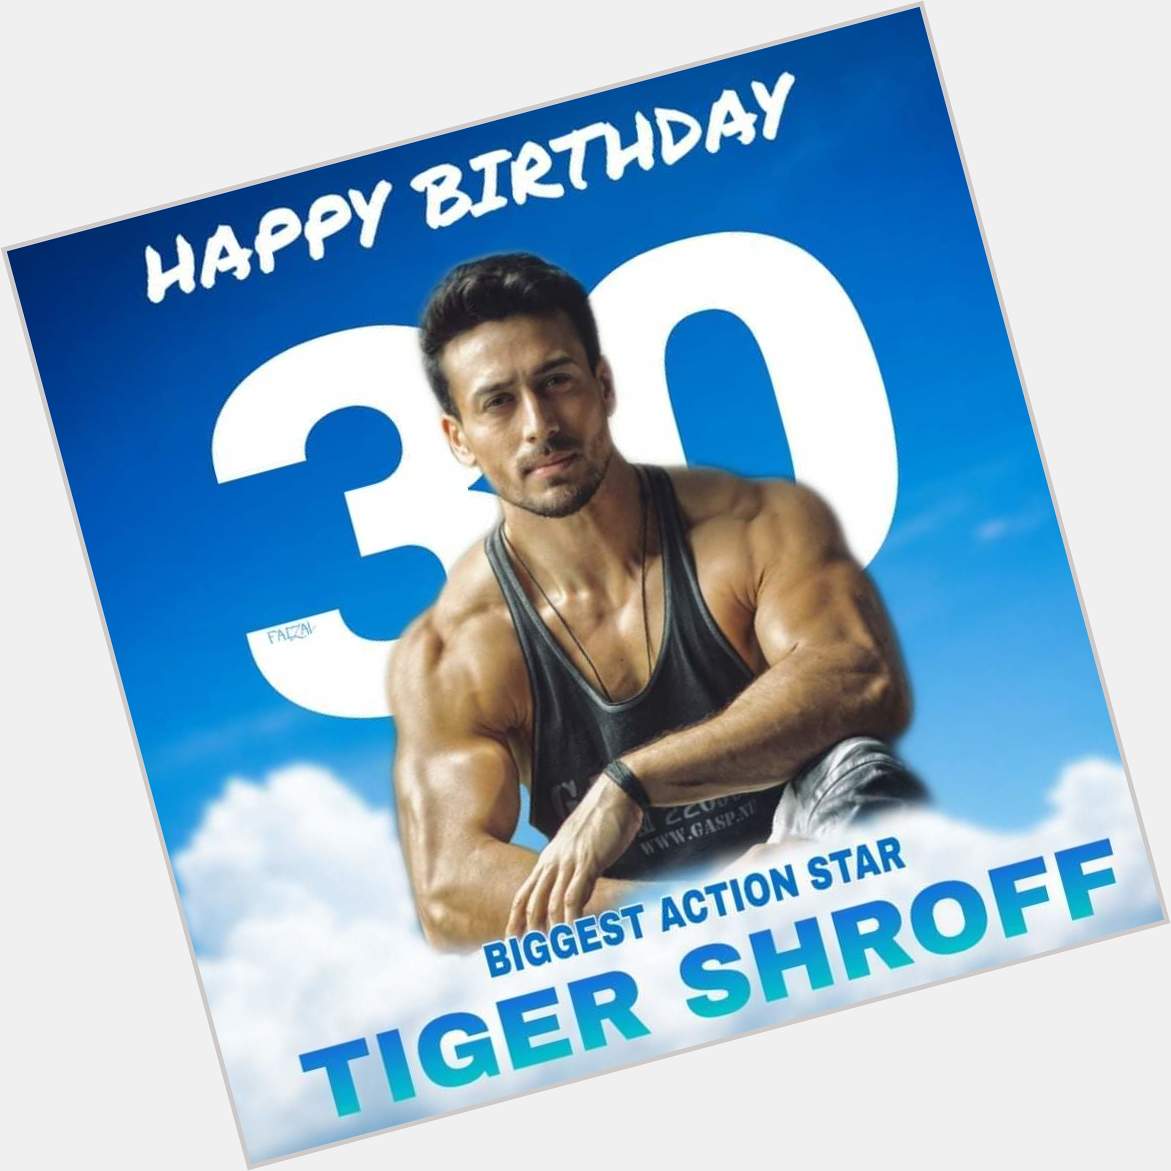 Tomorrow is our day  Advance Happy birthday king -

Pics by - Tiger Shroff Myanmar FC 